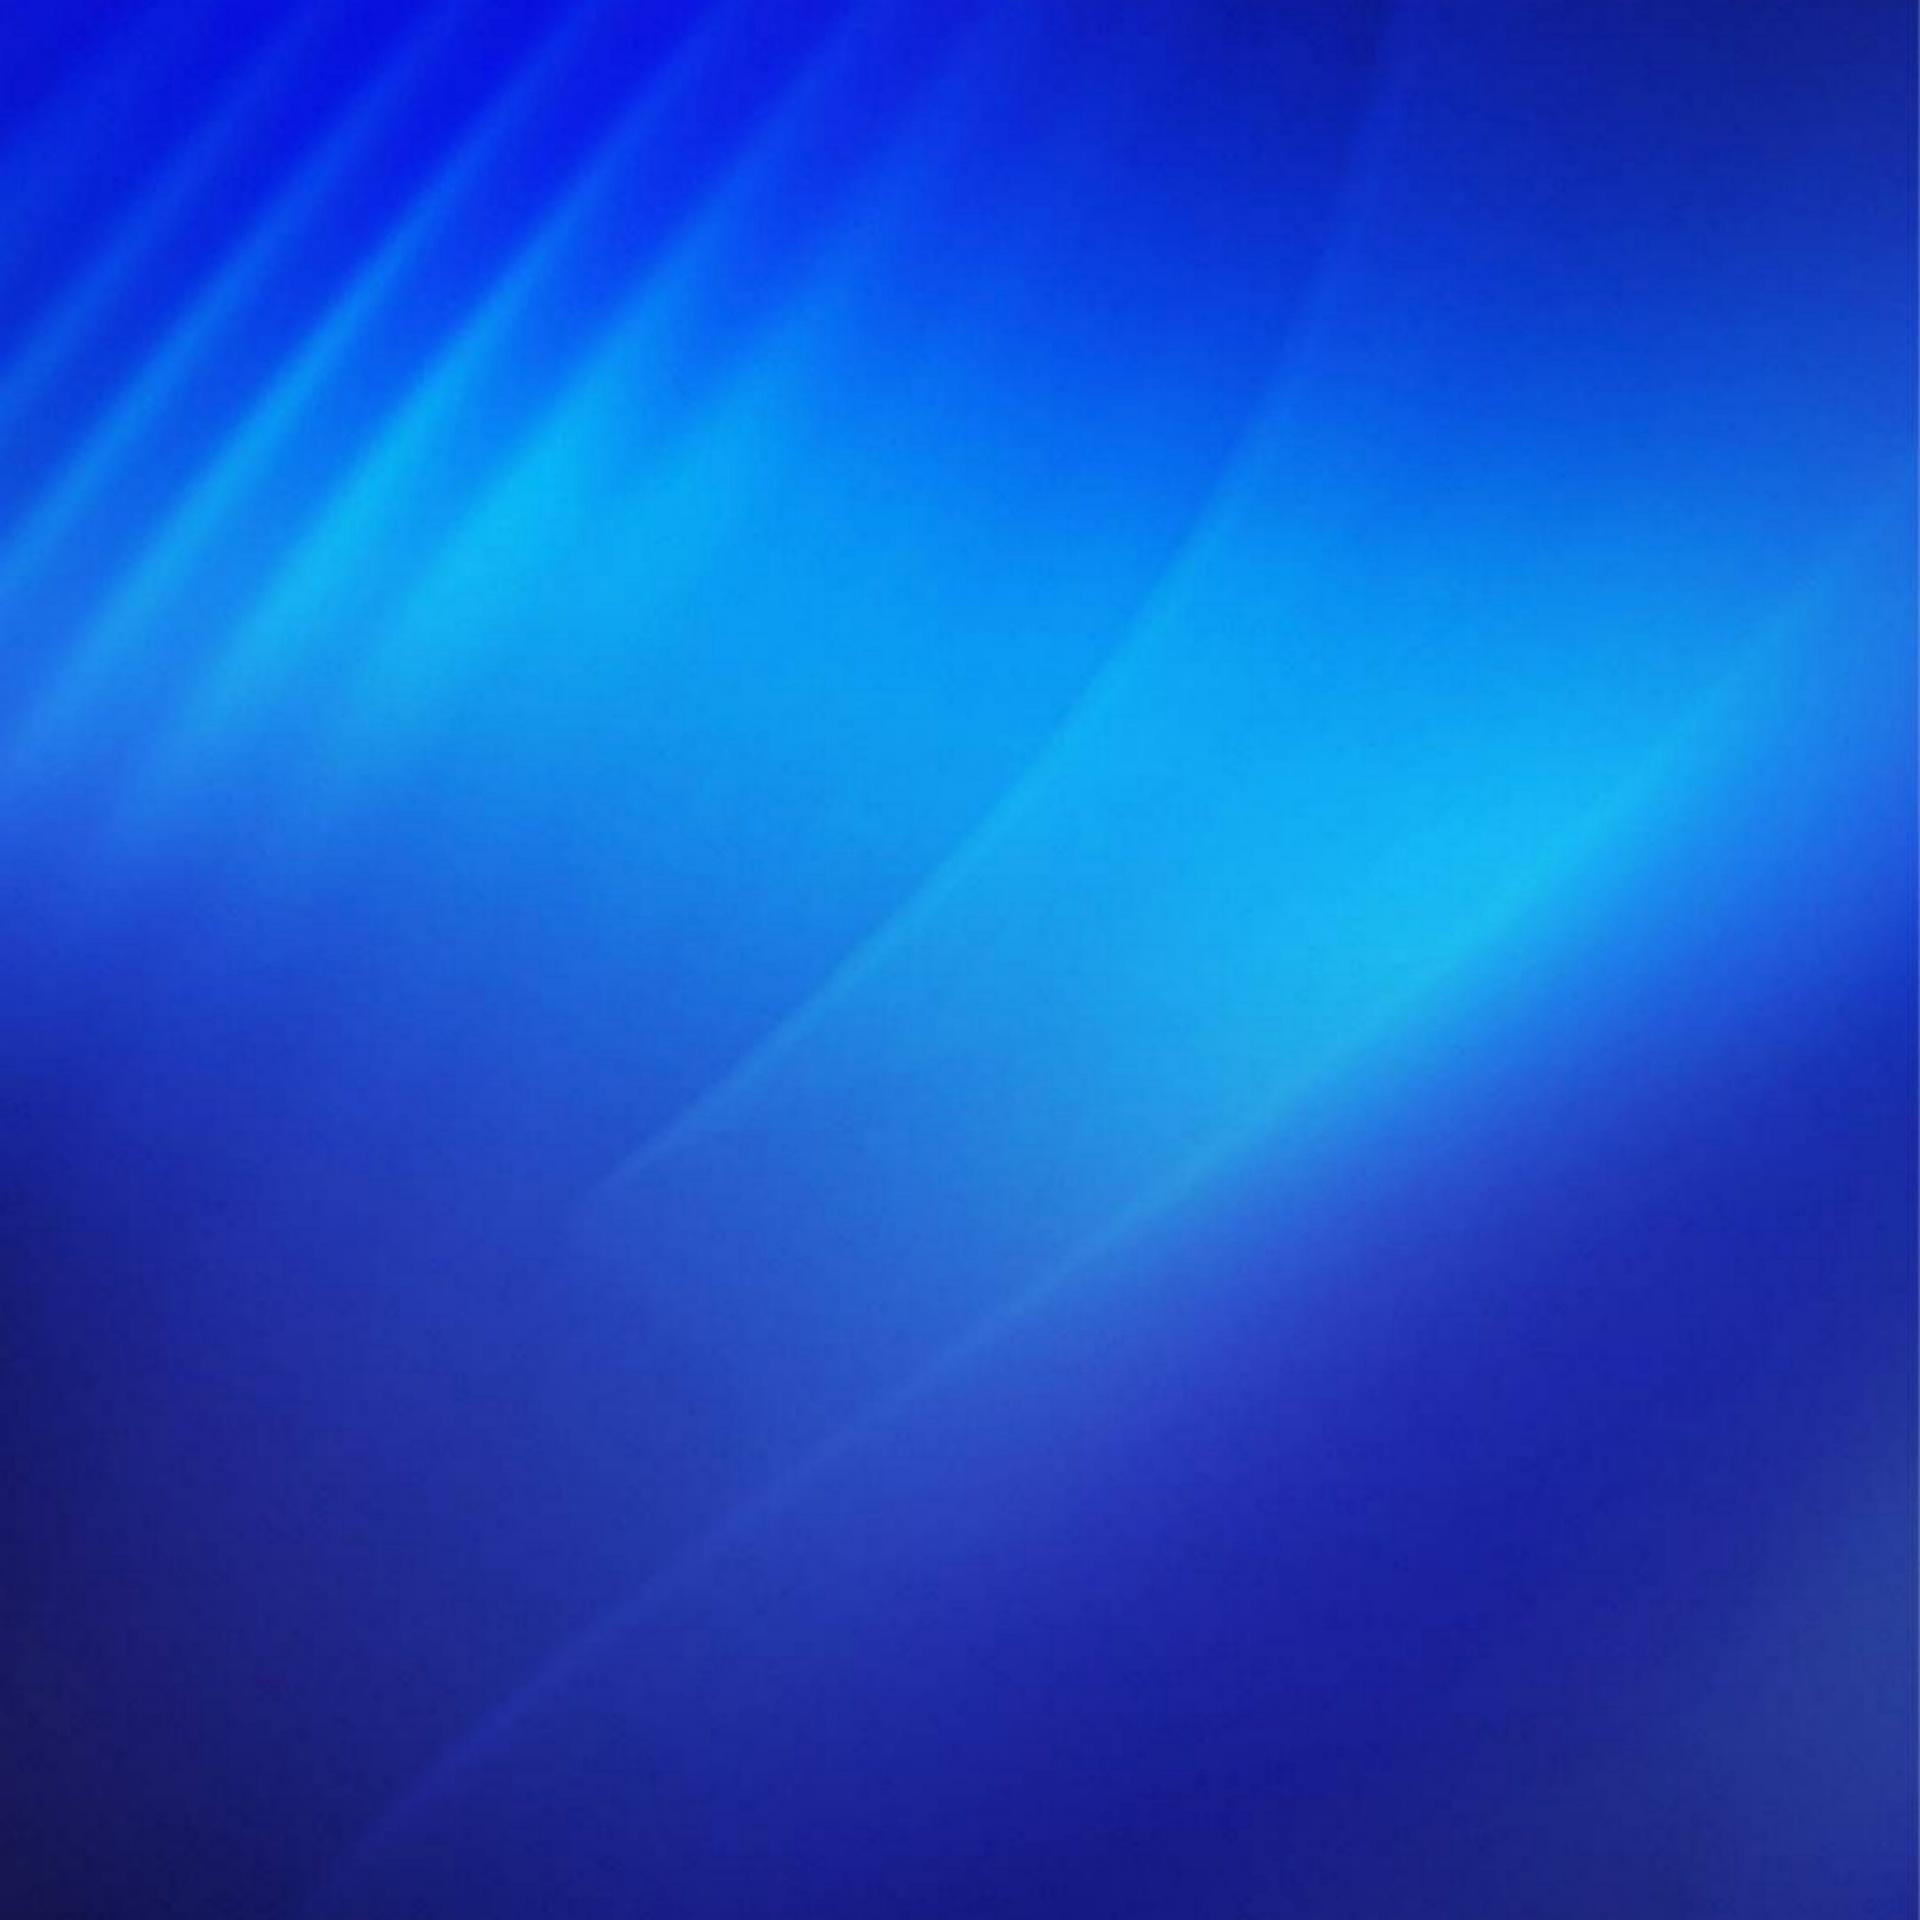 Download free photo of Wallpaper,background,tint,gradient,blue - from  